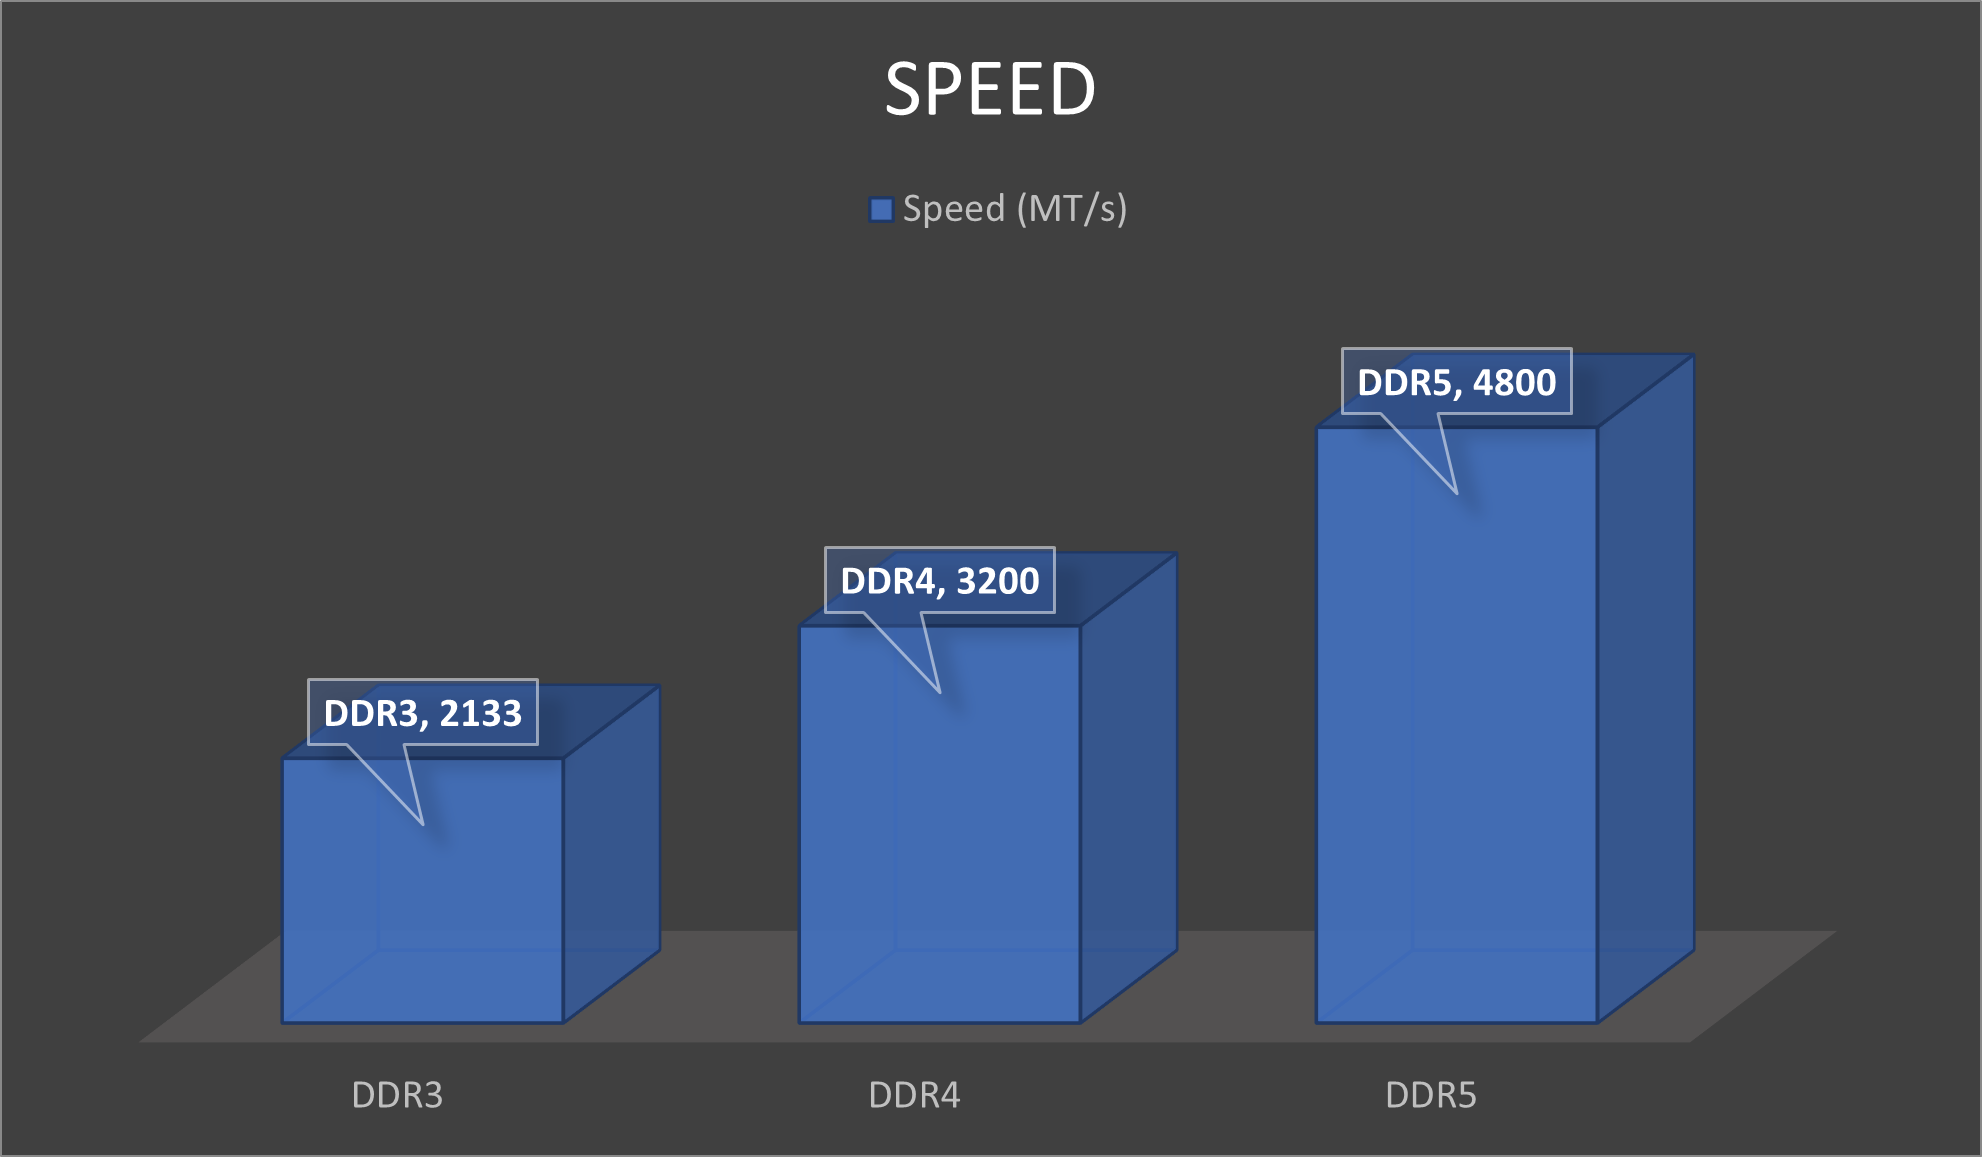 DDR4 vs DDR5 - will it be worth the upgrade?